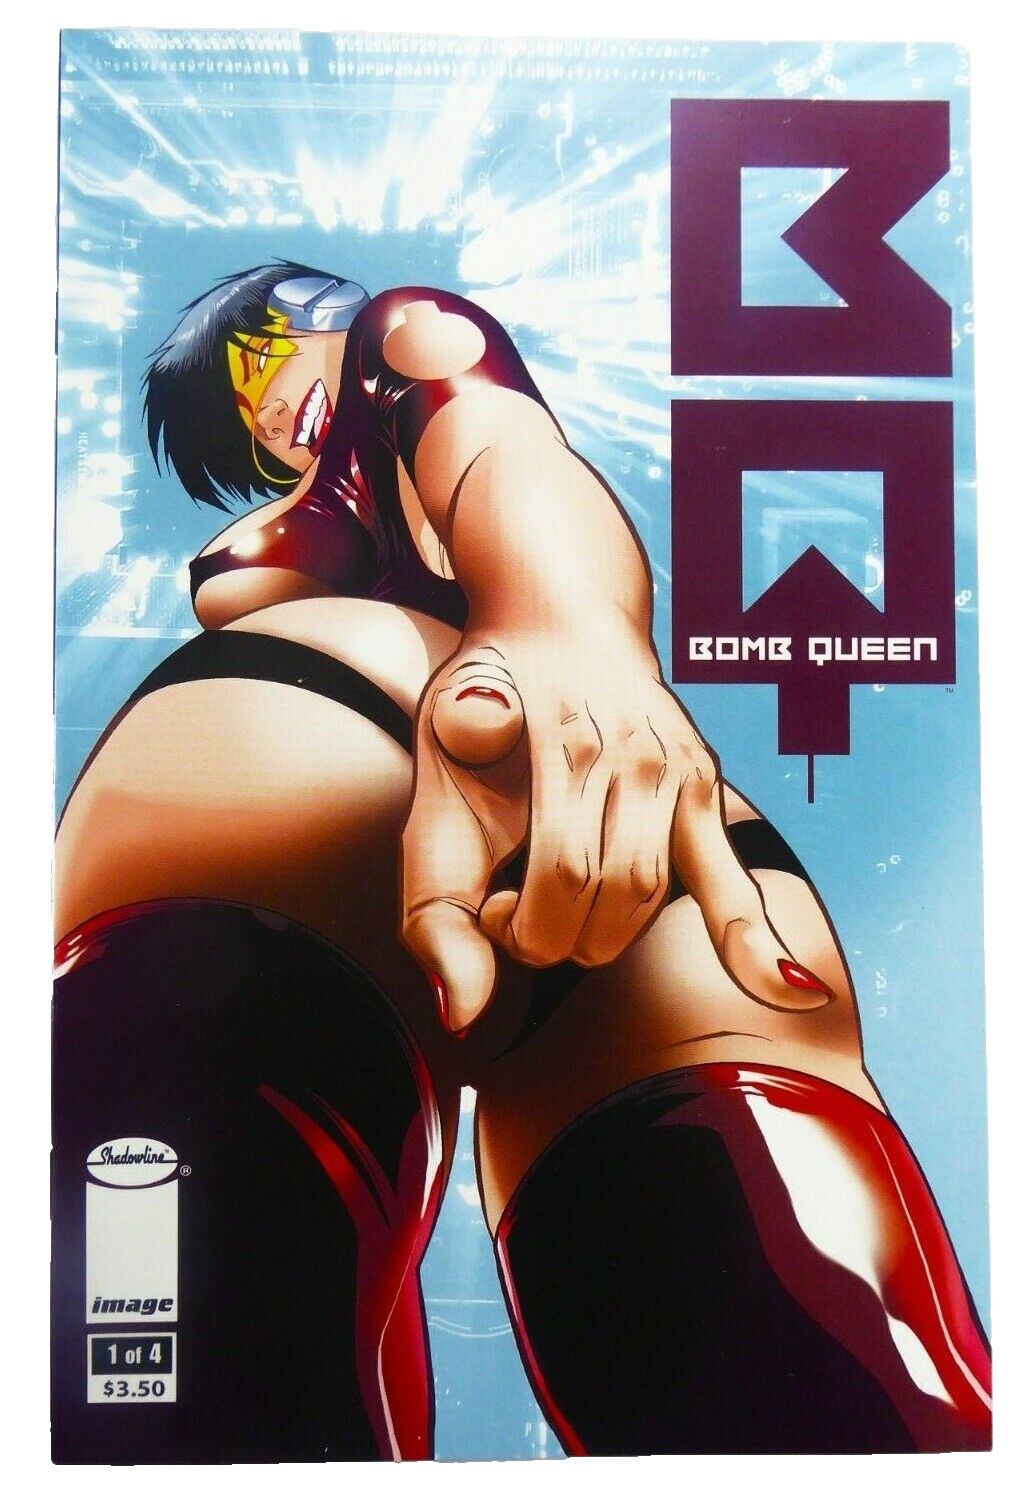 Image BOMB QUEEN (2011) #1 NM (9.4) Ships FREE